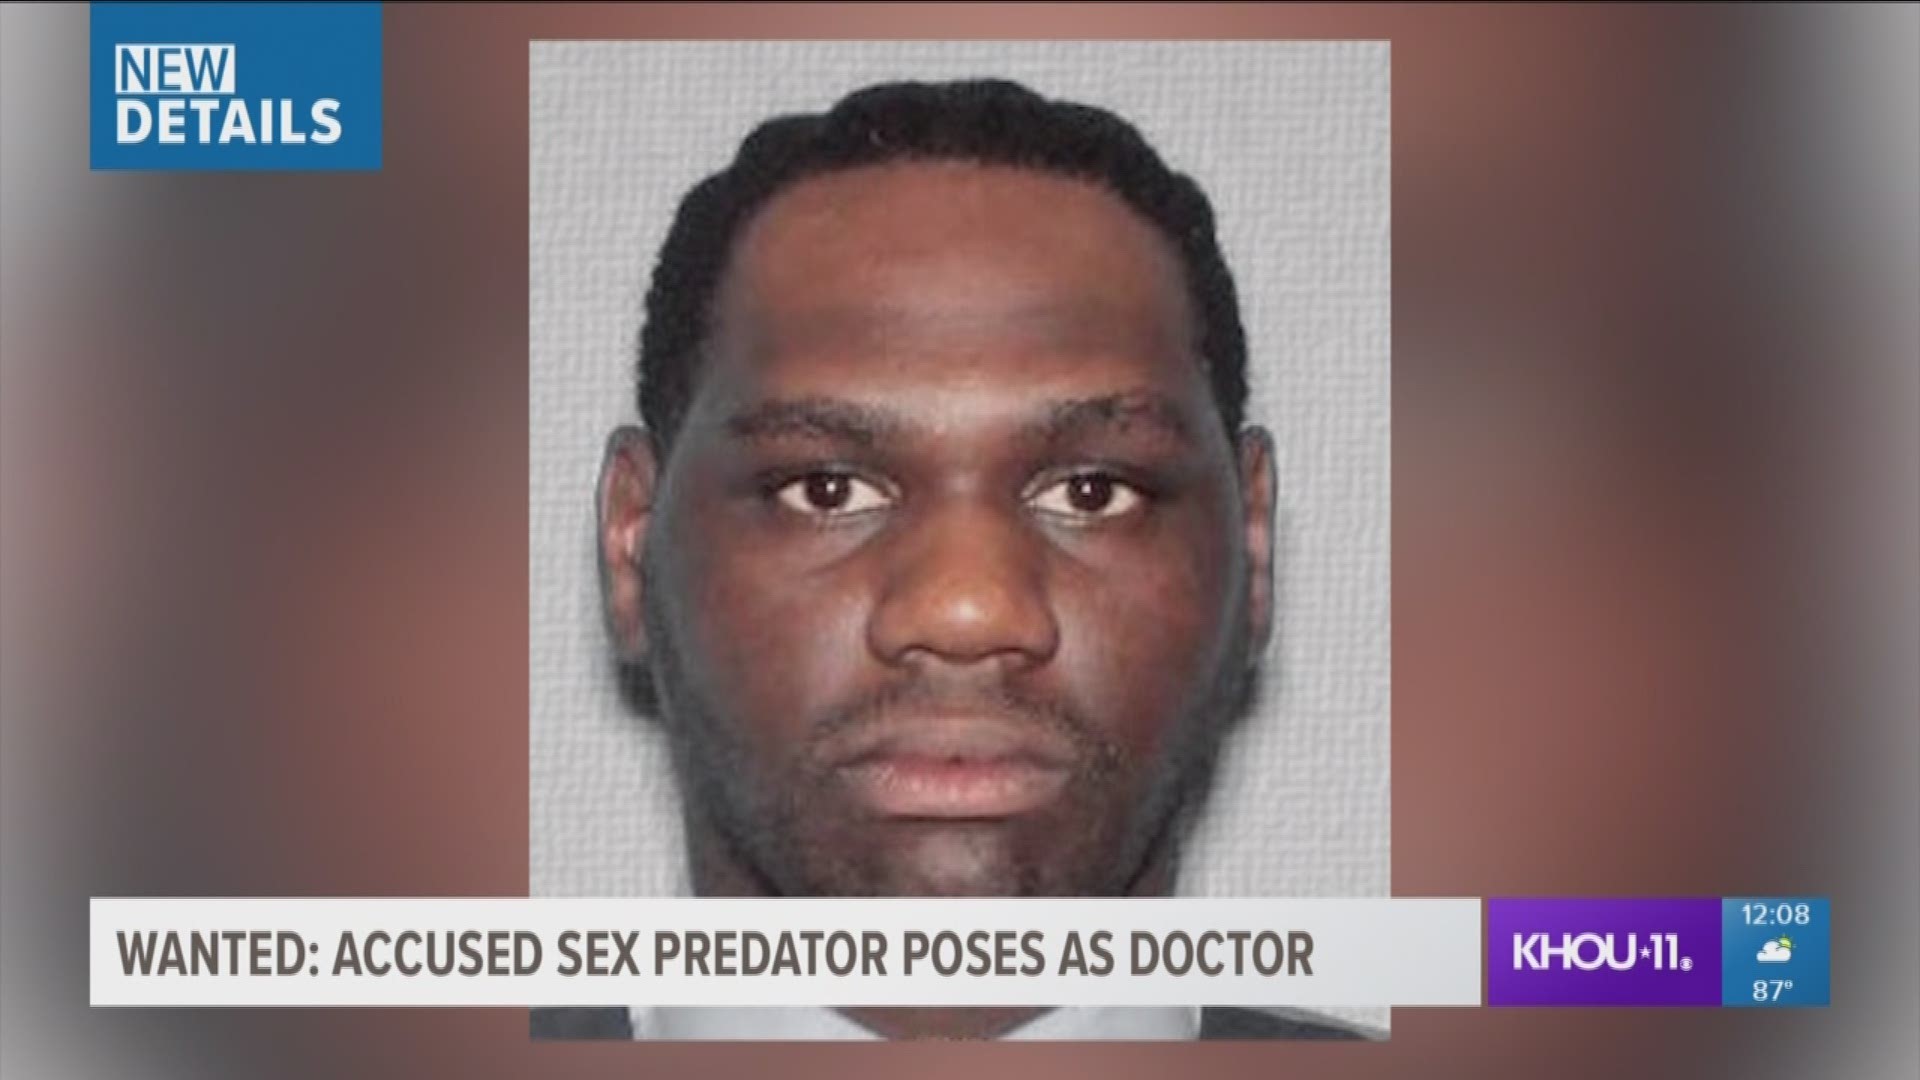 Houston police are asking for the public?s help finding a suspected sexual predator who they say poses as a pediatrician.